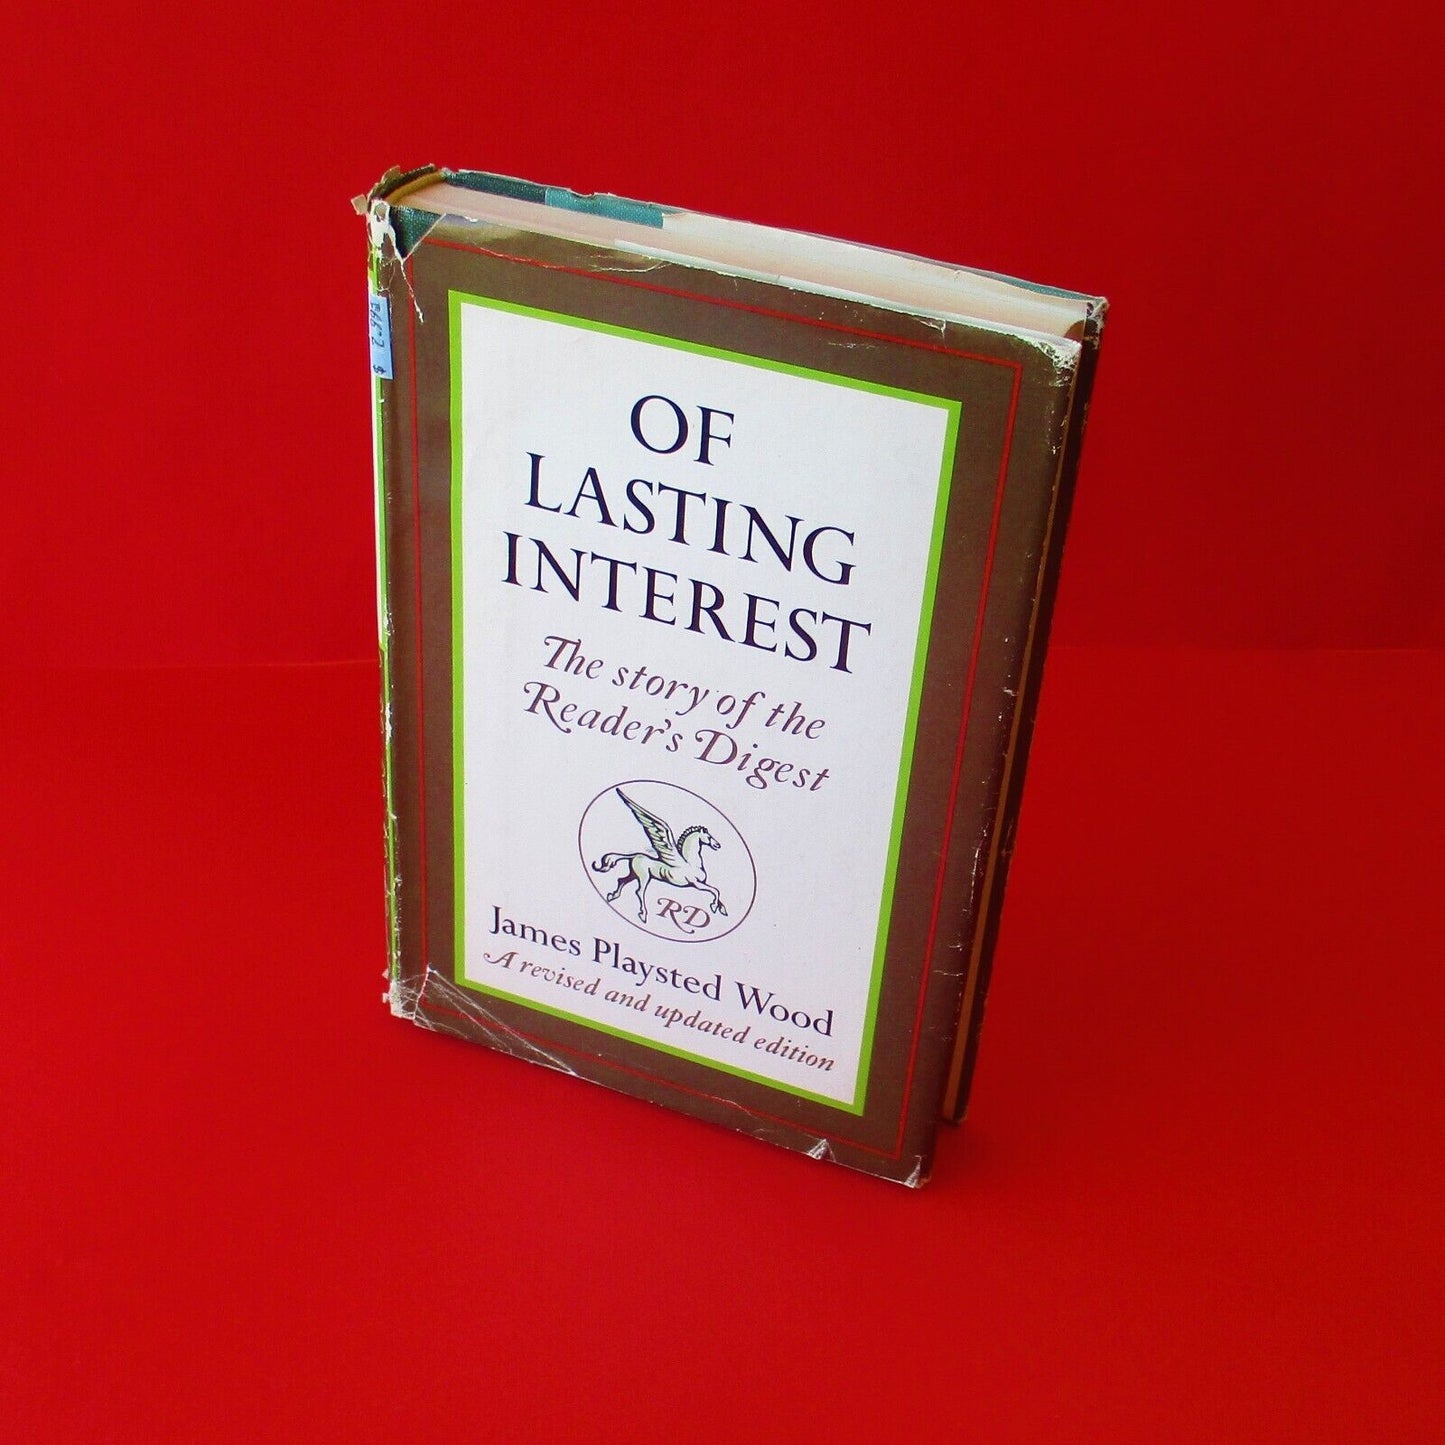 Of Lasting Interest: The Story of the Reader's Digest Hardcover